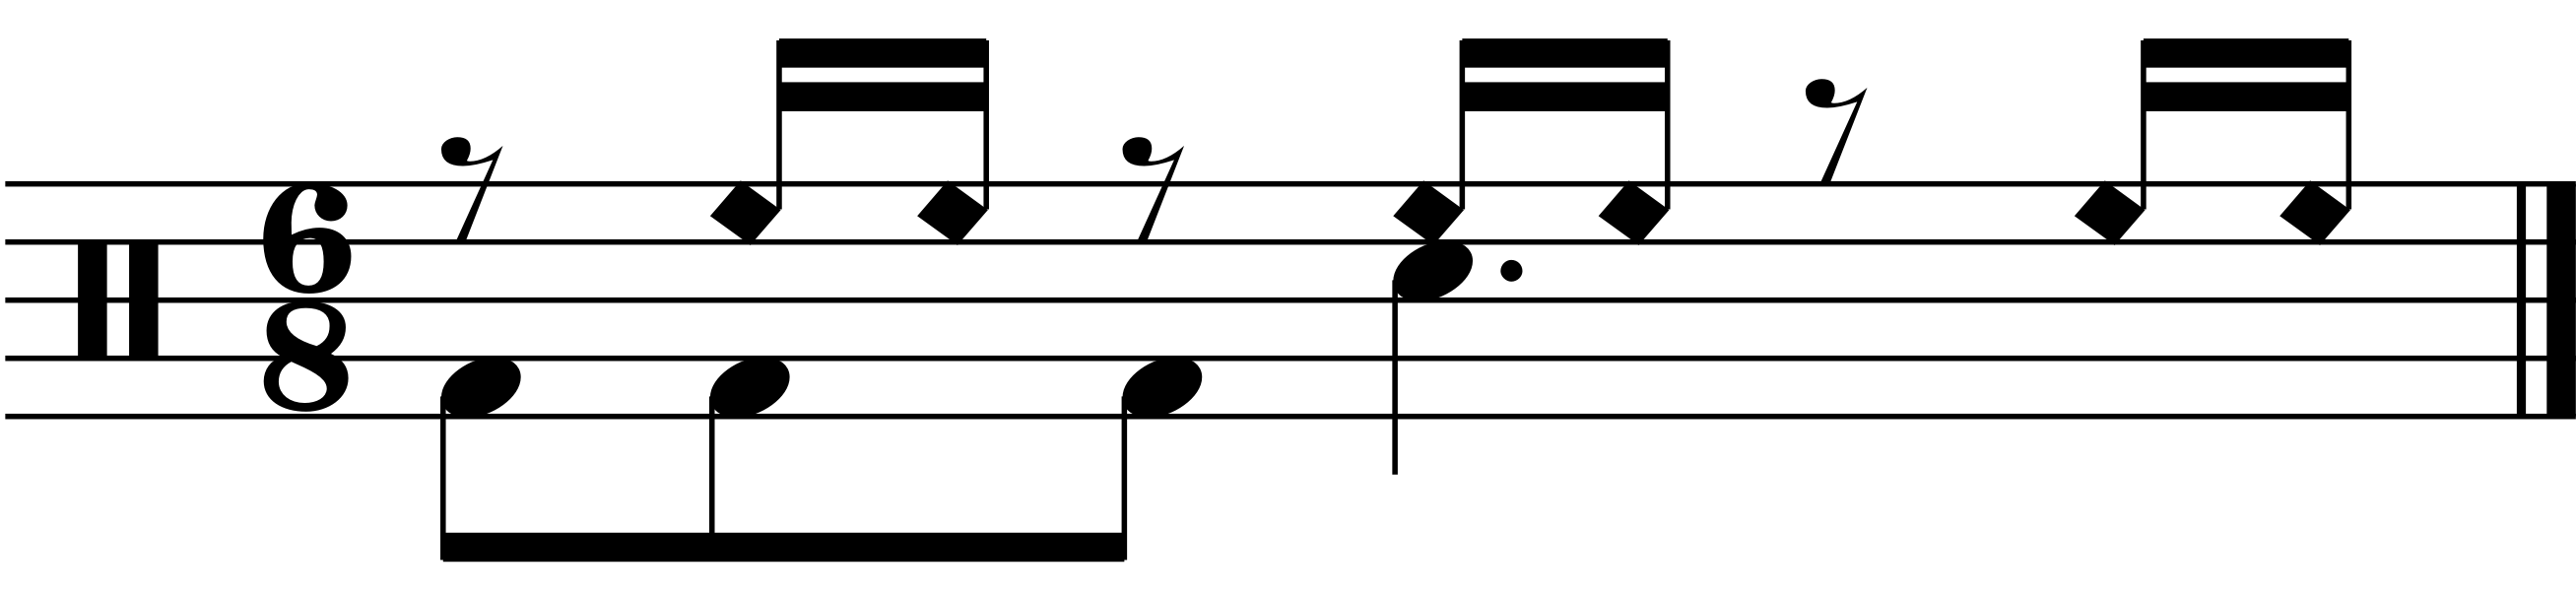 A 6/8 right hand groove concept.